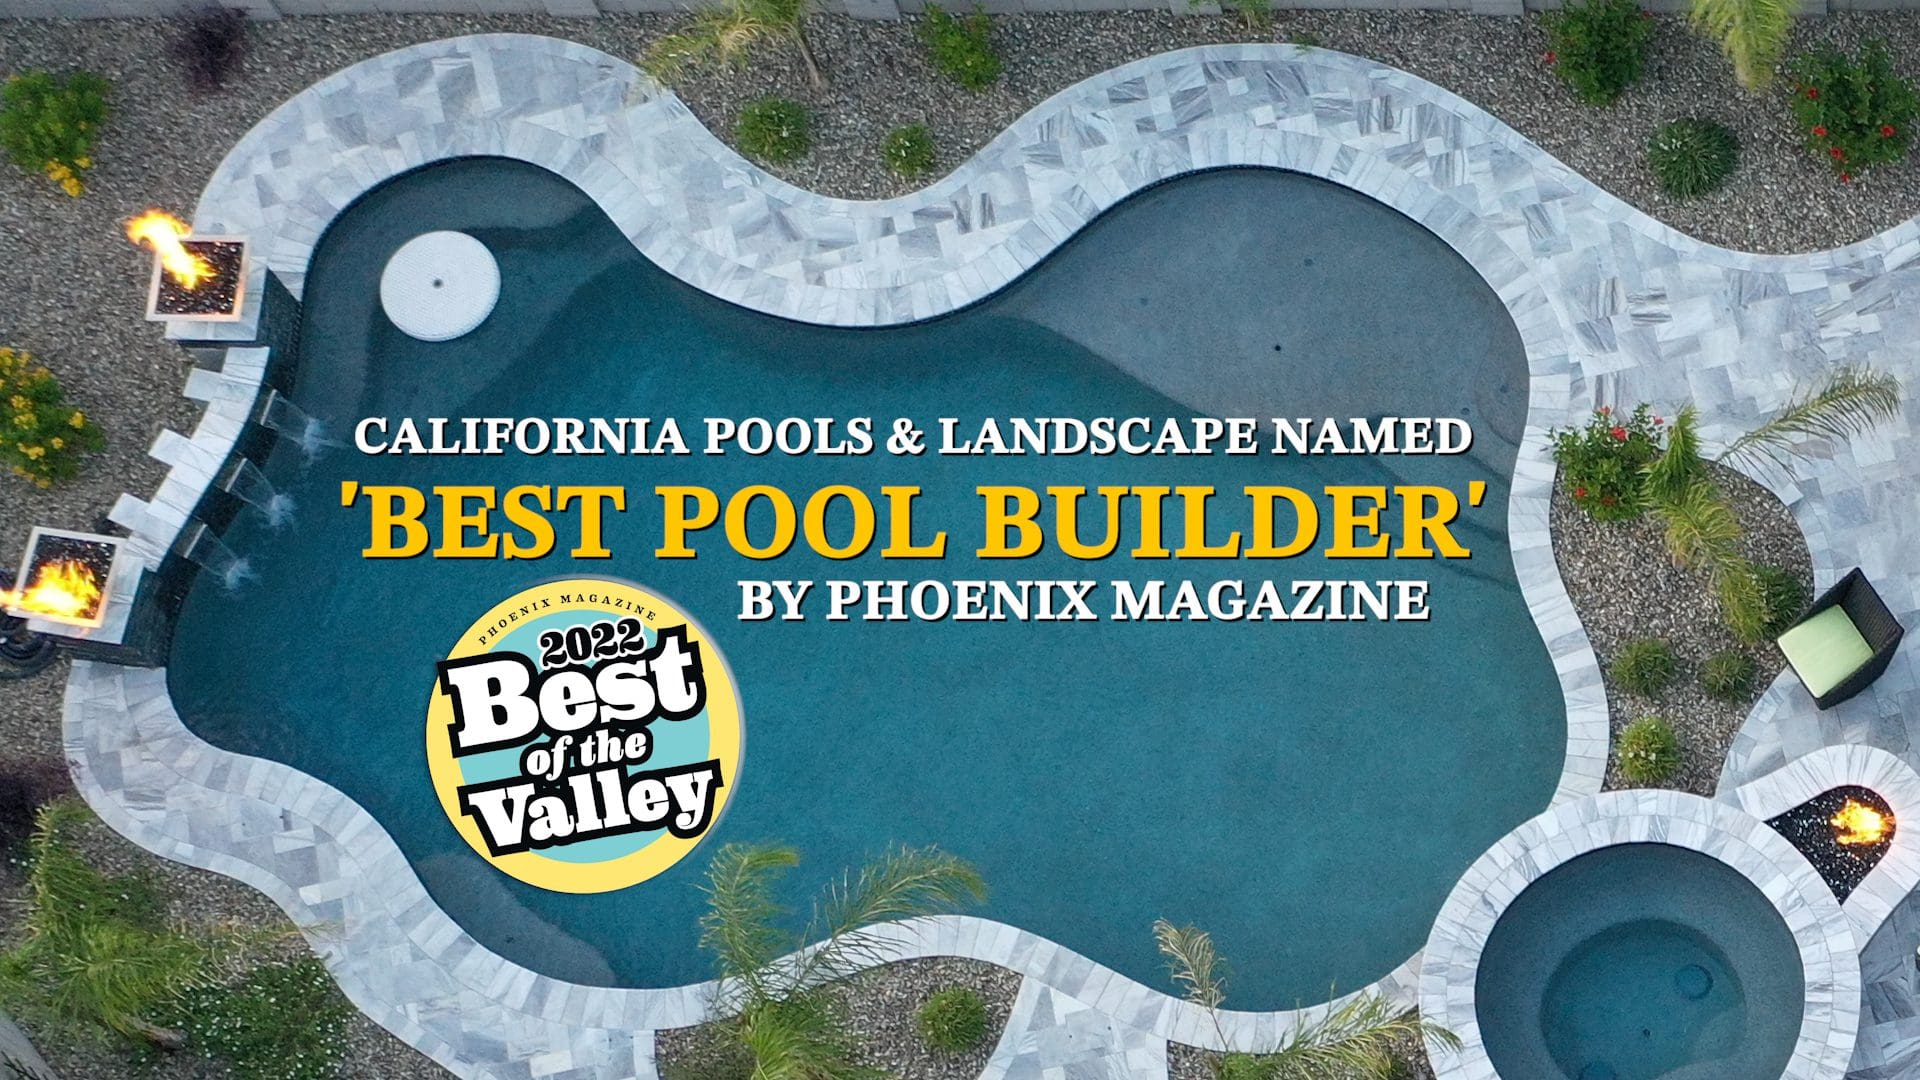 California Pools & Landscape Voted ‘Best Pool Builder’ in Phoenix Magazine’s Best of the Valley 2022